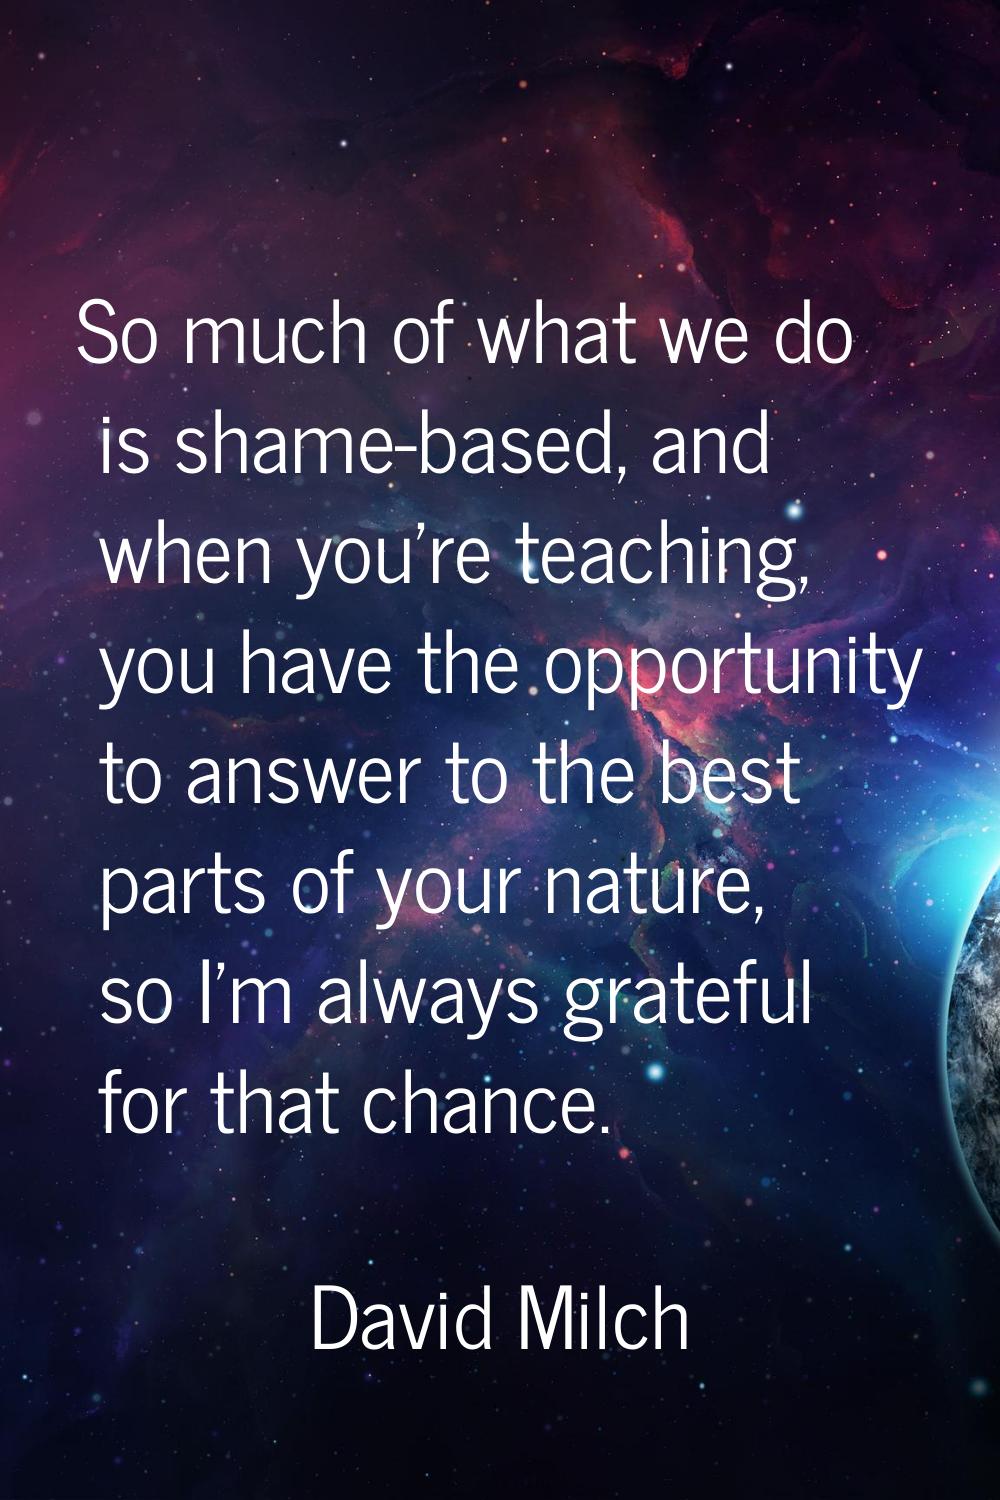 So much of what we do is shame-based, and when you're teaching, you have the opportunity to answer 